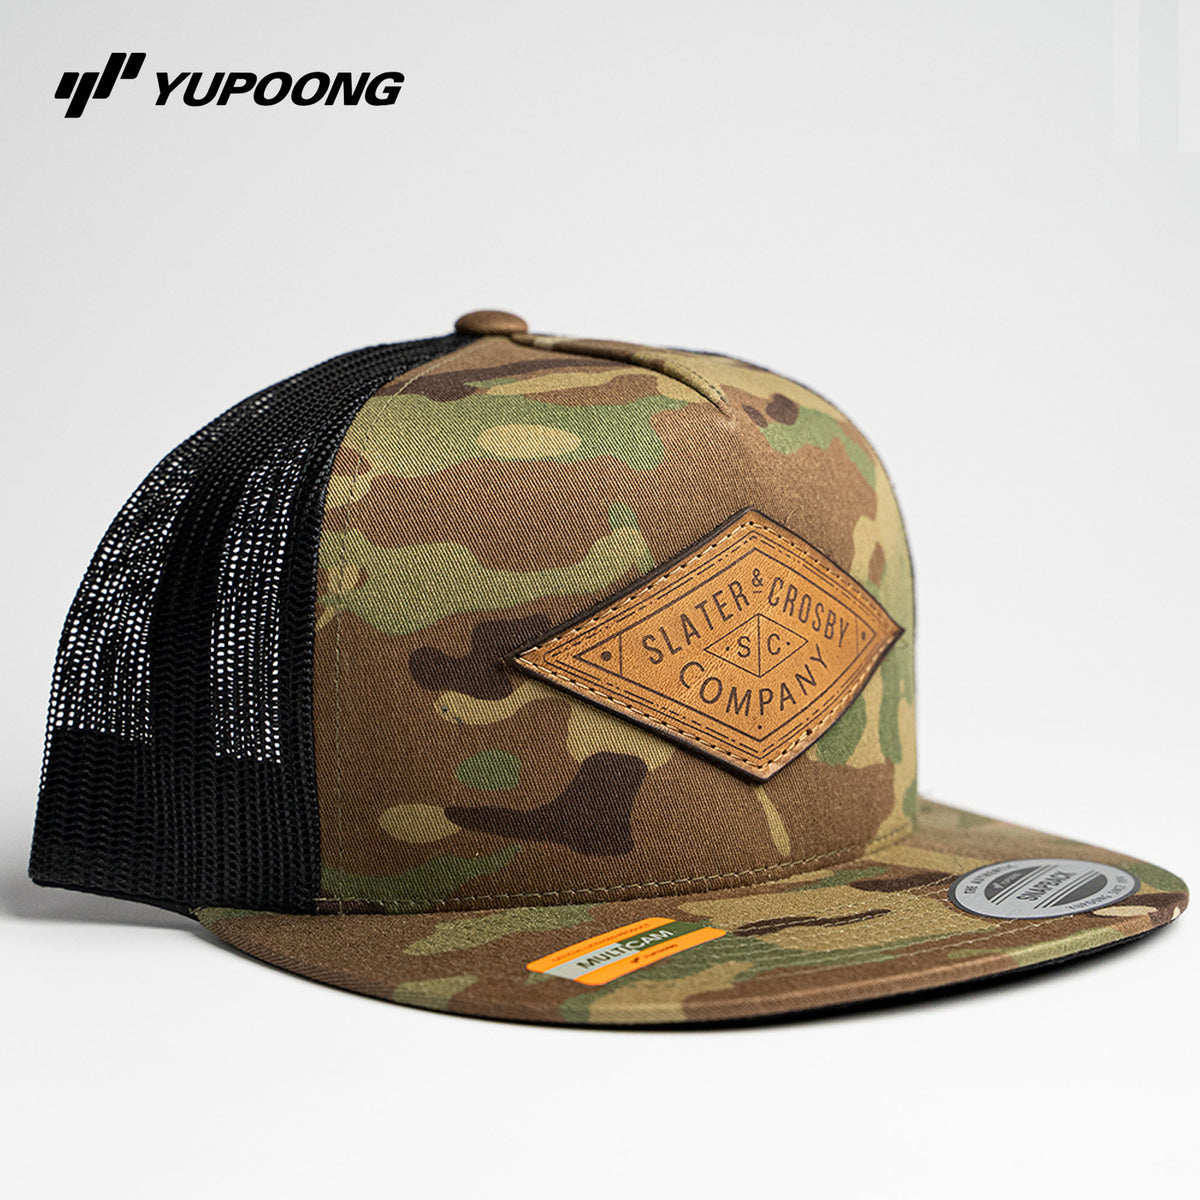 LOG Mesh 6006MC Hat Yupoong with Custom Trucker Snapback MultiCam YOUR - Leather Holtz